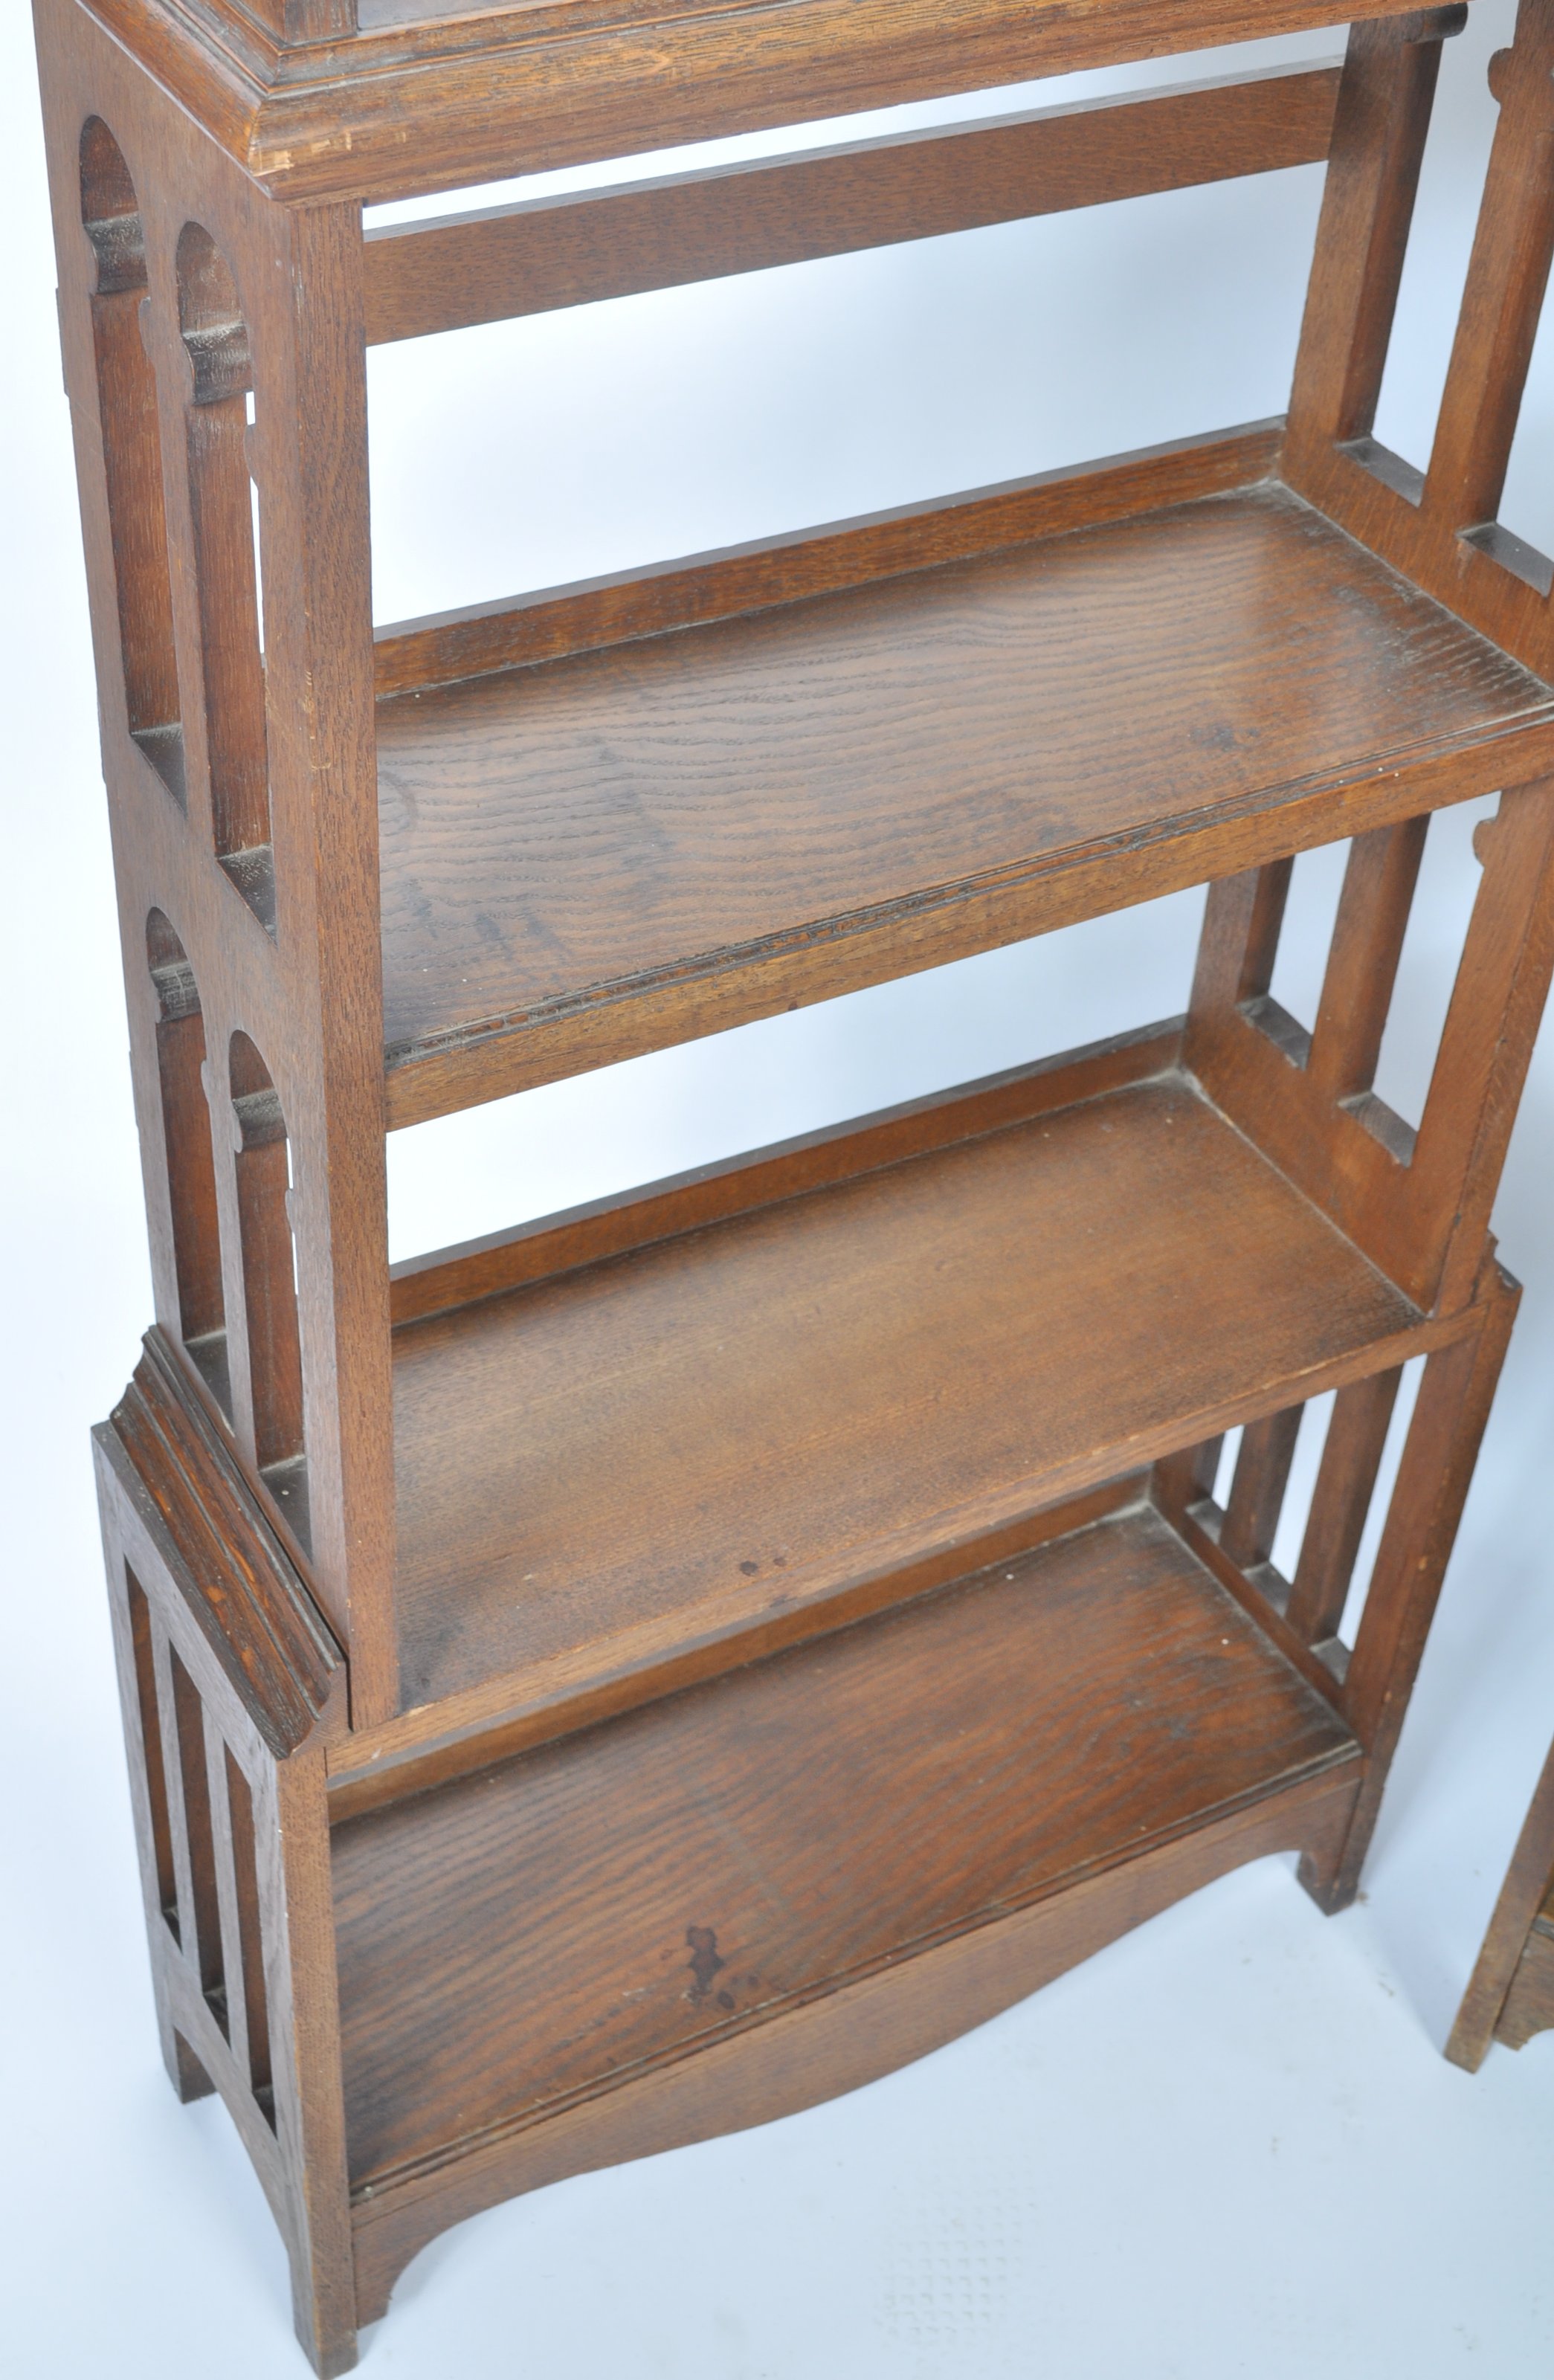 PAIR OF EARLY 20TH CENTURY LIBERTY MANNER BOOKCASES - Image 7 of 8